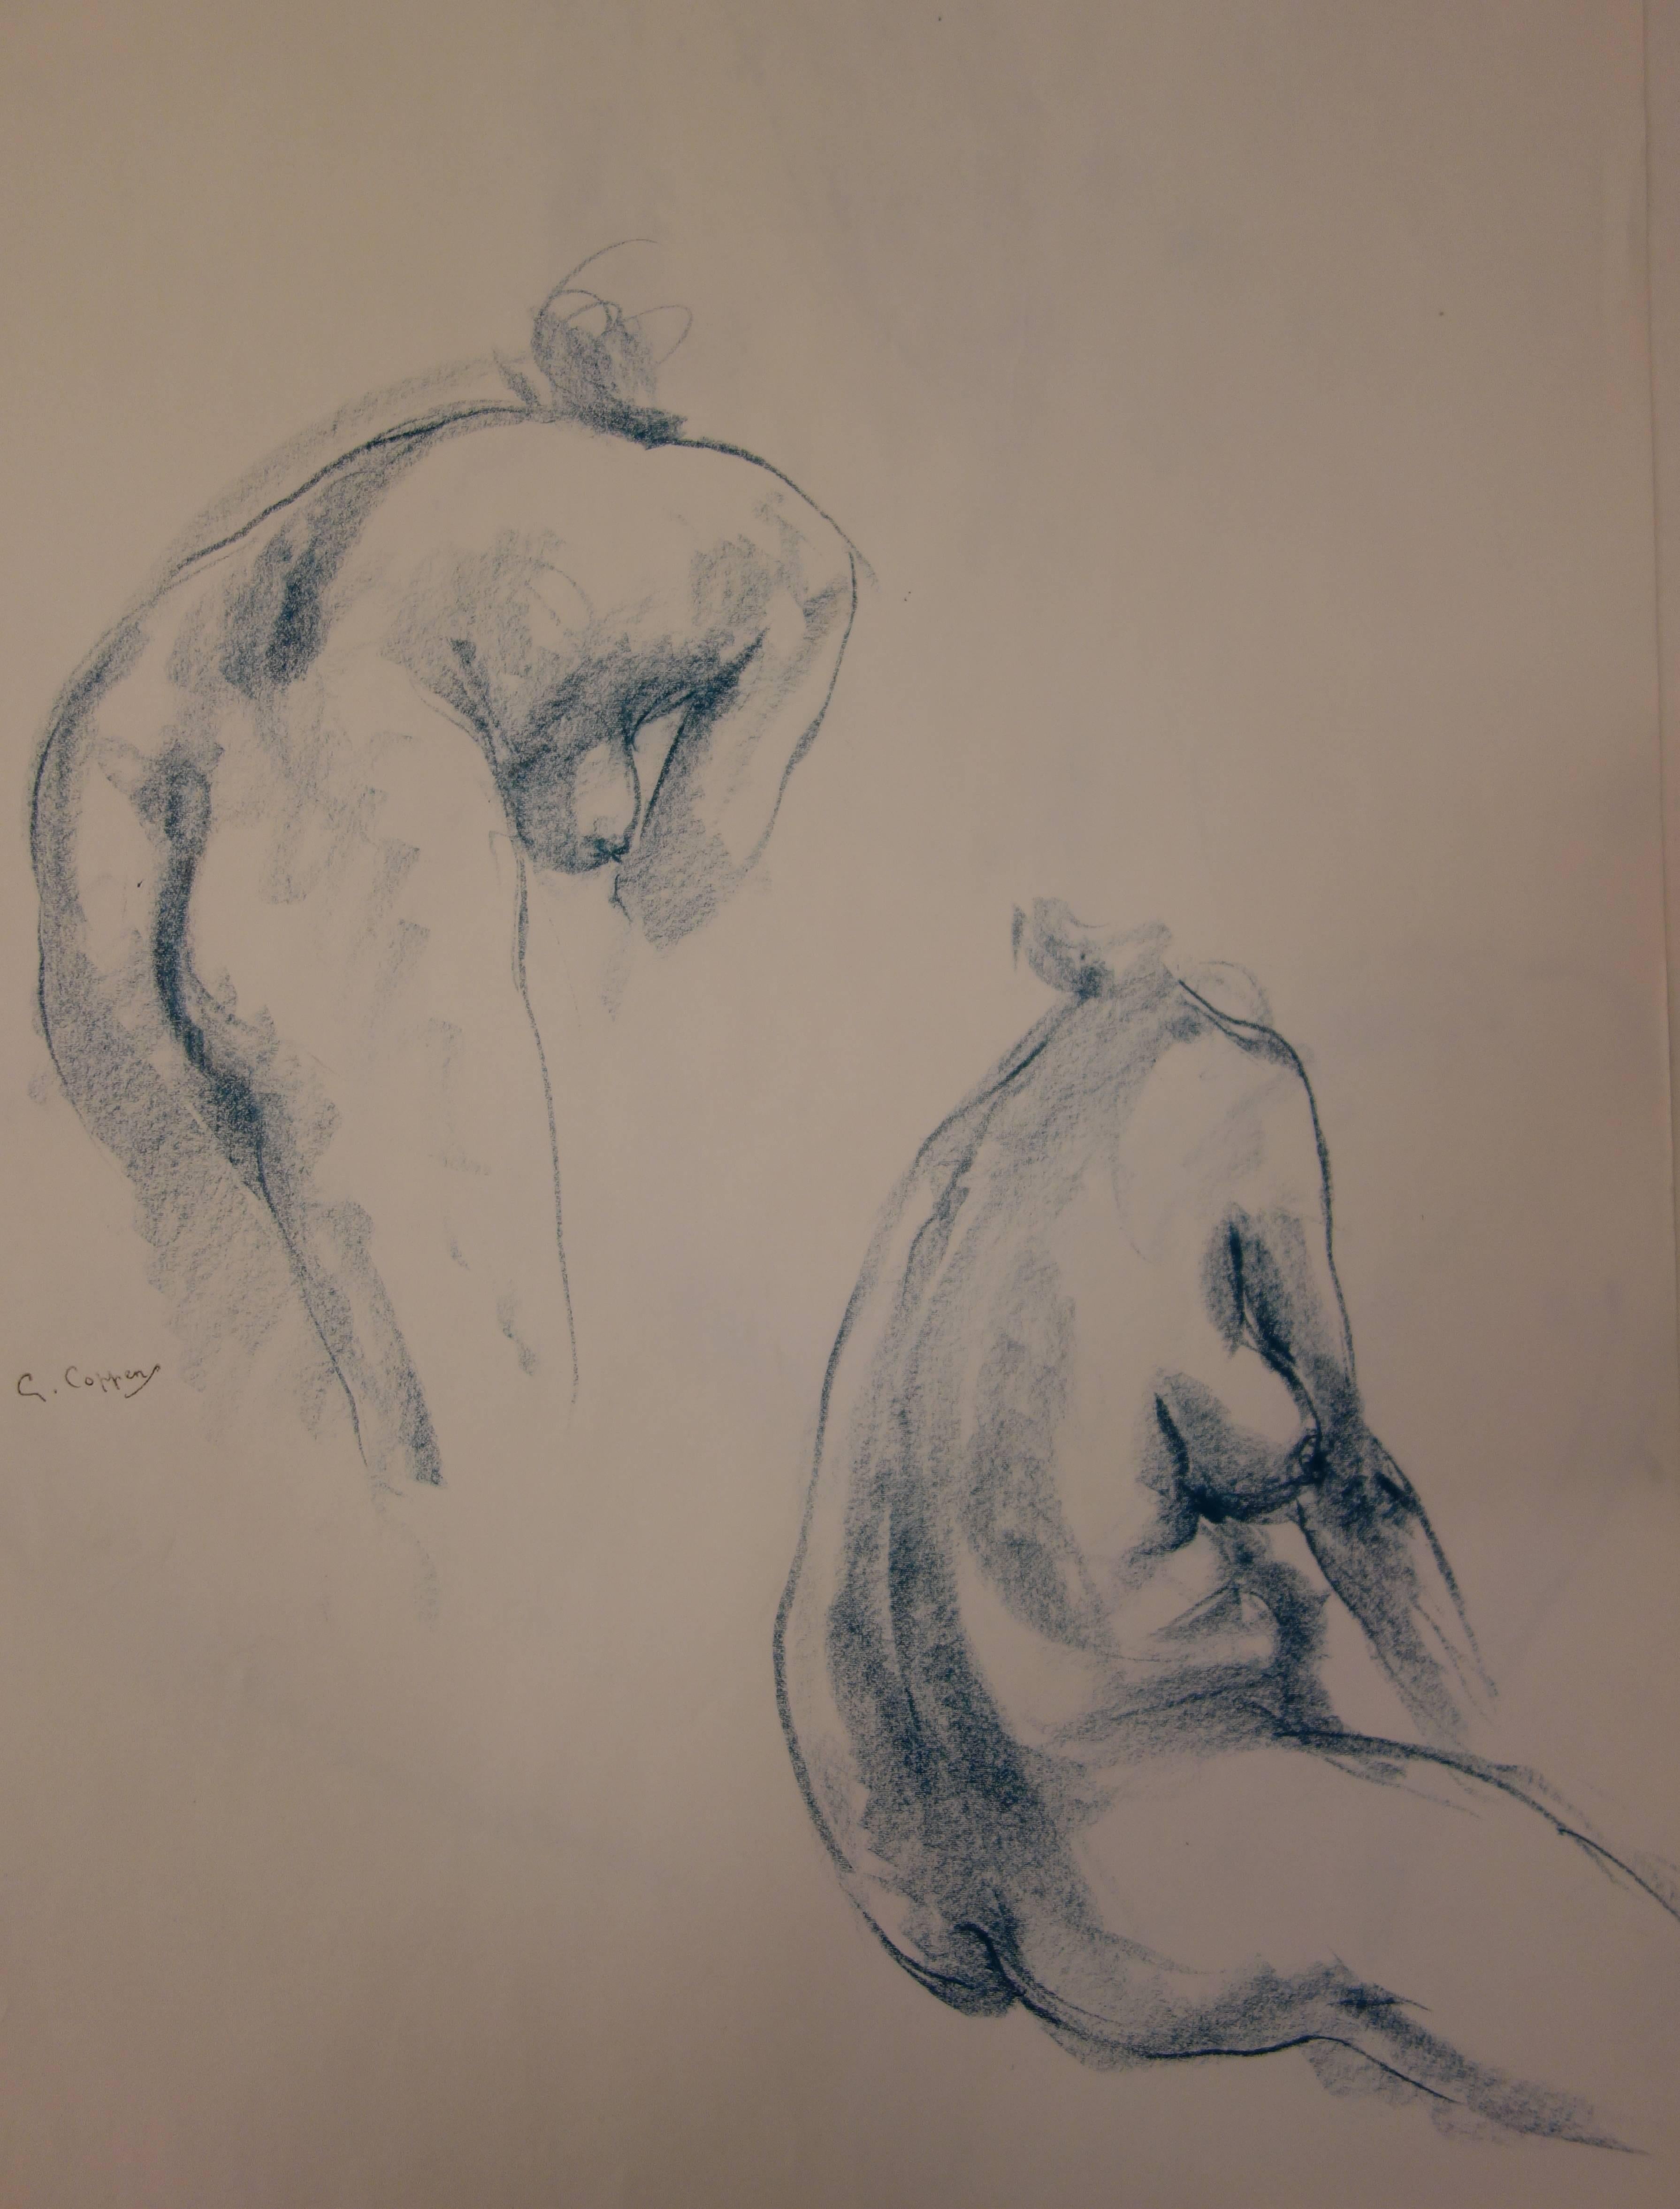 Two Studies of a Nude Profile - Original signed charcoals drawing - Modern Art by Gaston Coppens